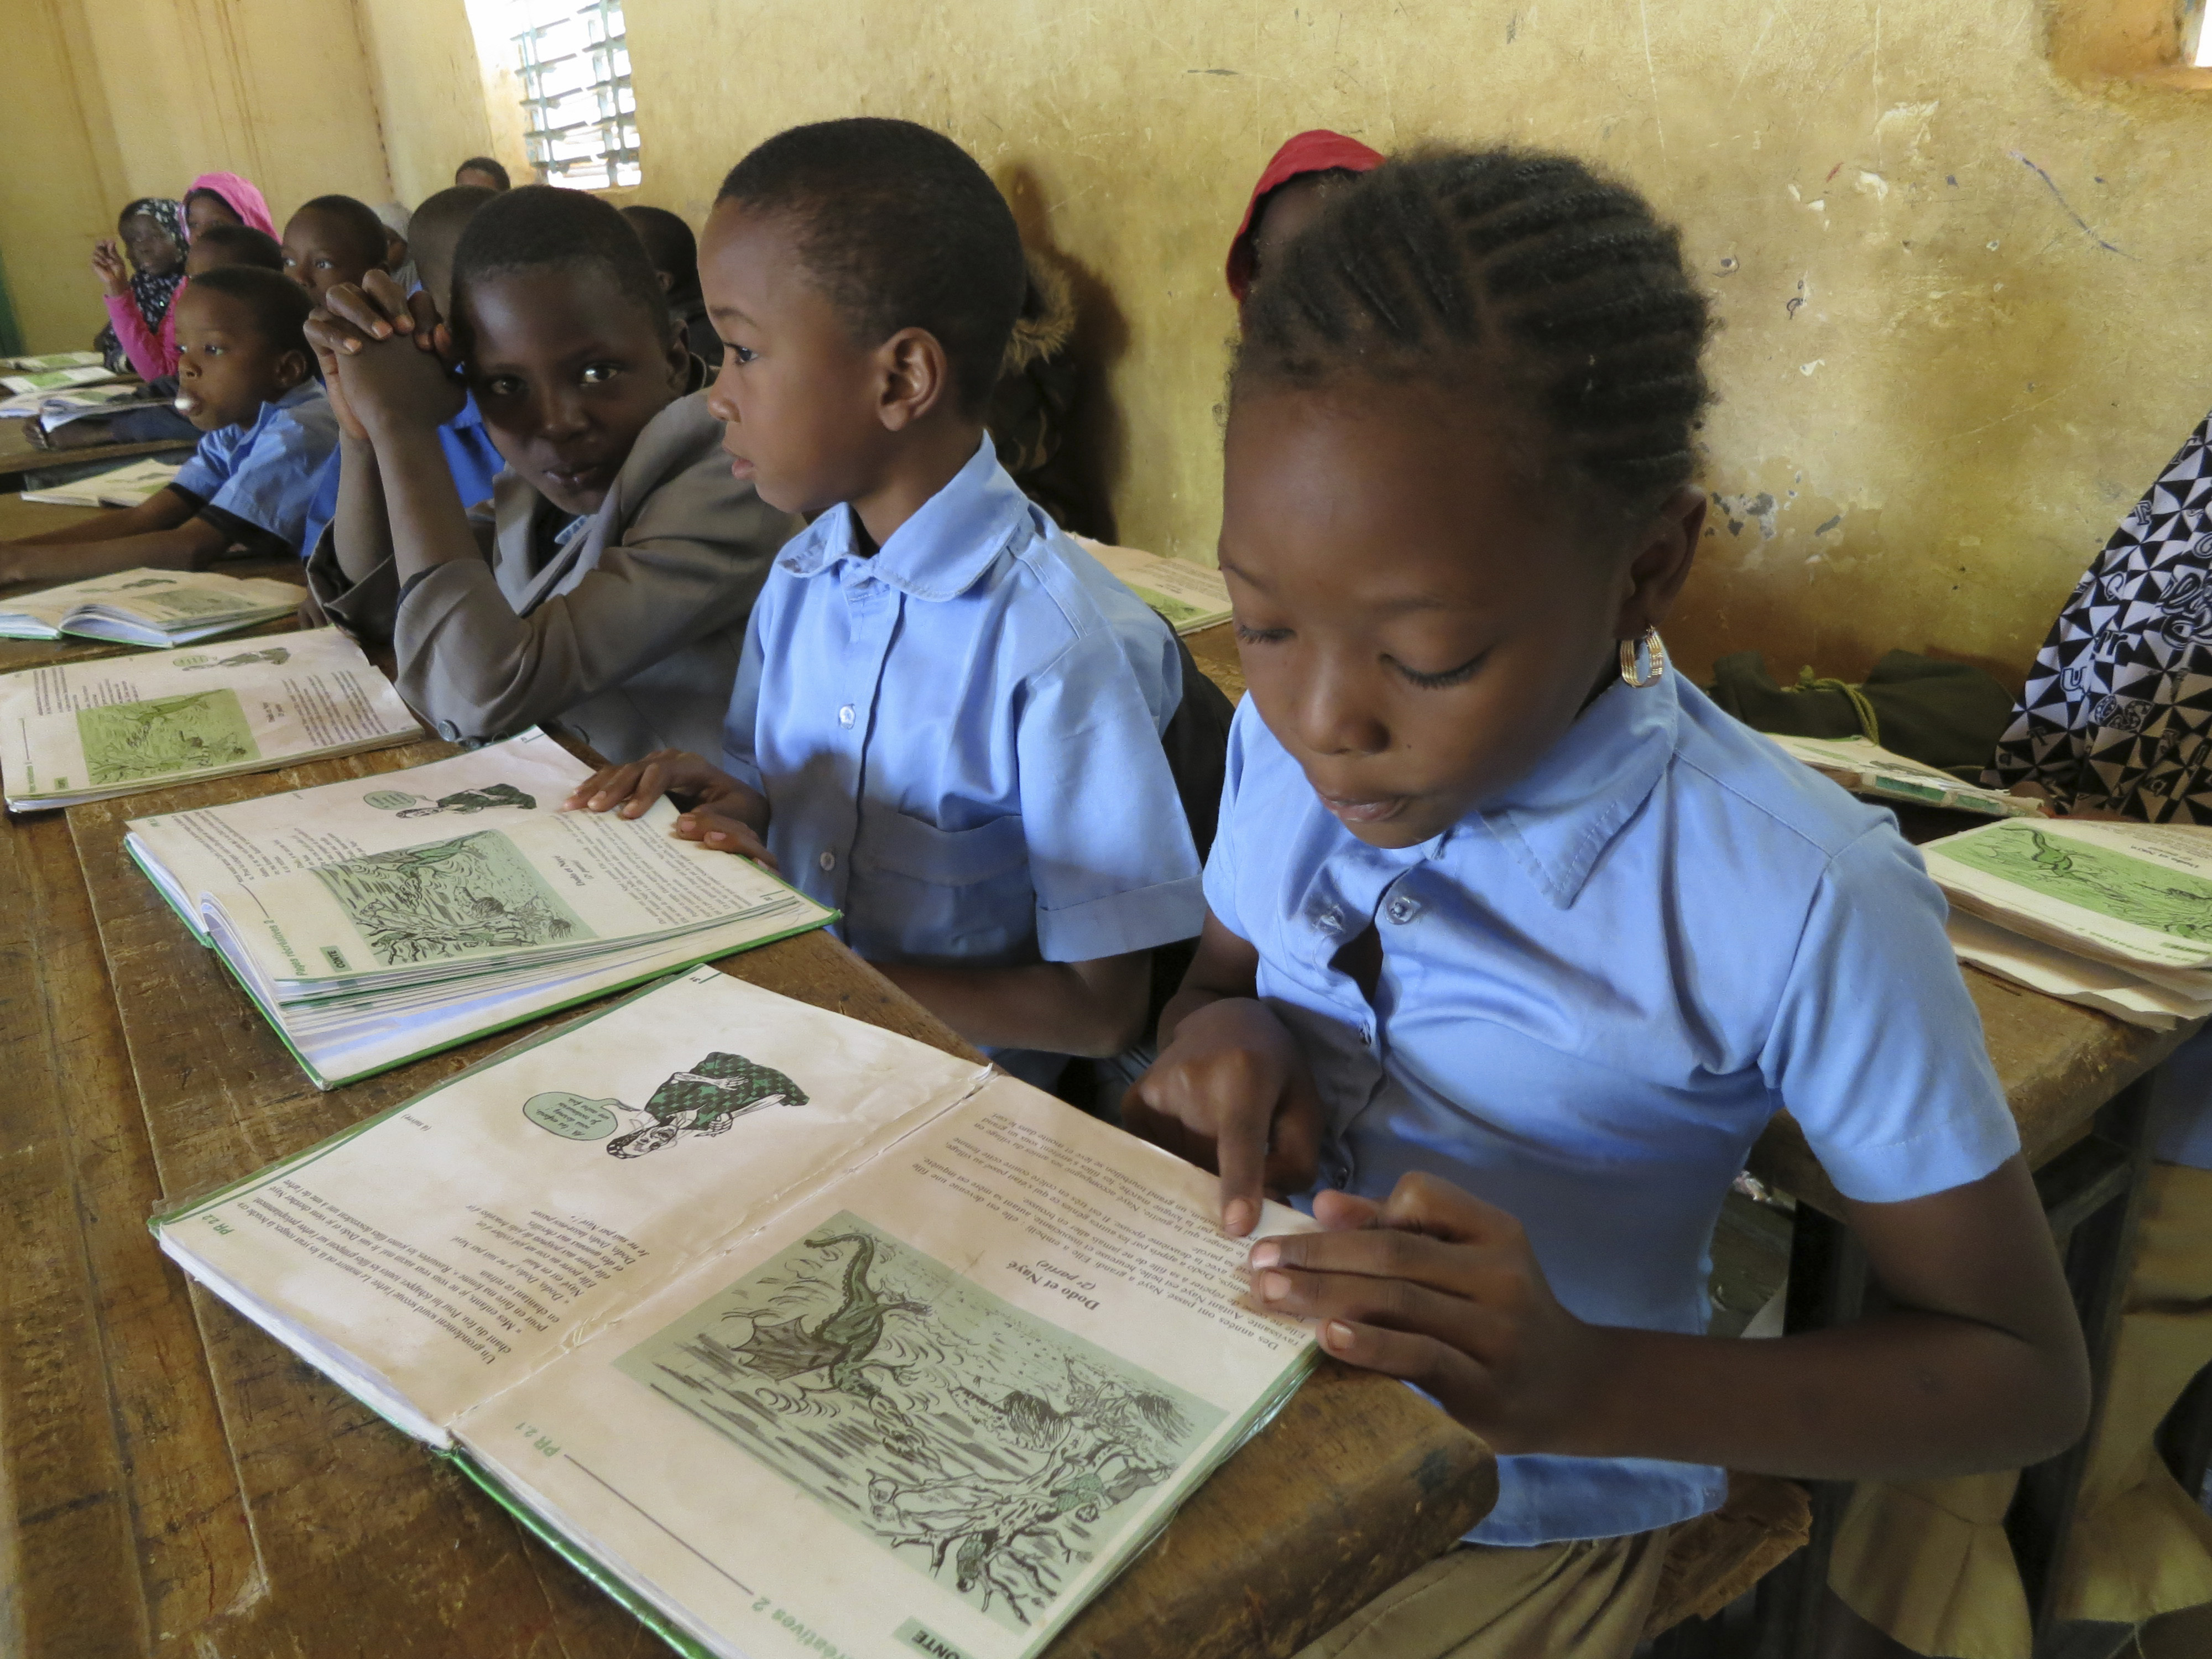 Students reading in school books at a Nigerian school on December 09, 2013, in Niamey, Niger. (Ute Grabowsky&mdash;Photothek via Getty Images)